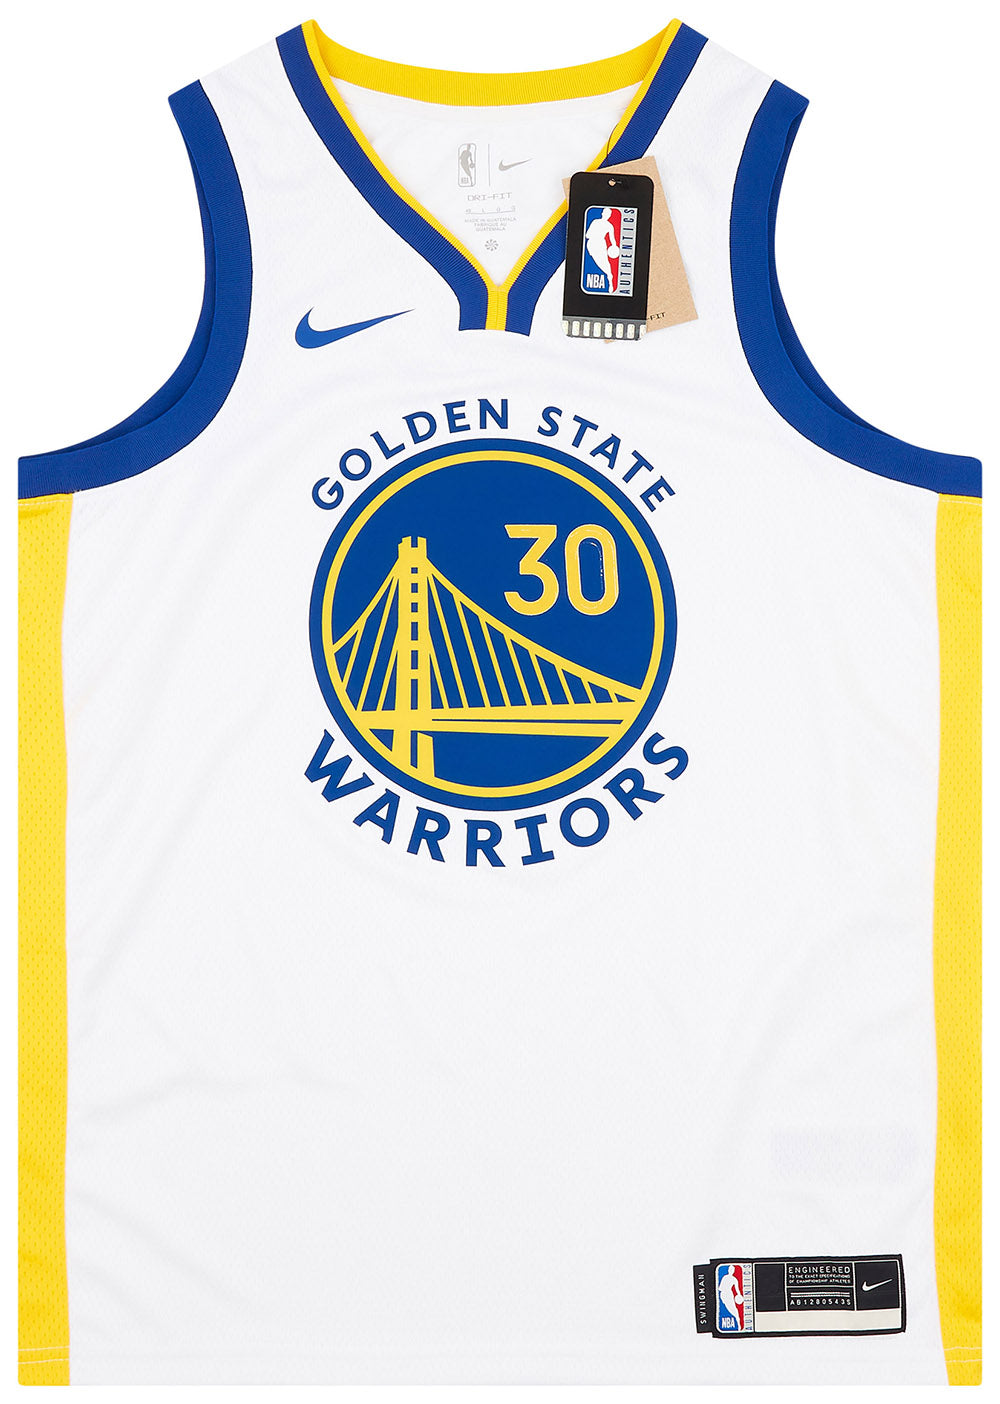 2017-21 GOLDEN STATE WARRIORS CURRY #30 NIKE SWINGMAN JERSEY (HOME) L -  W/TAGS